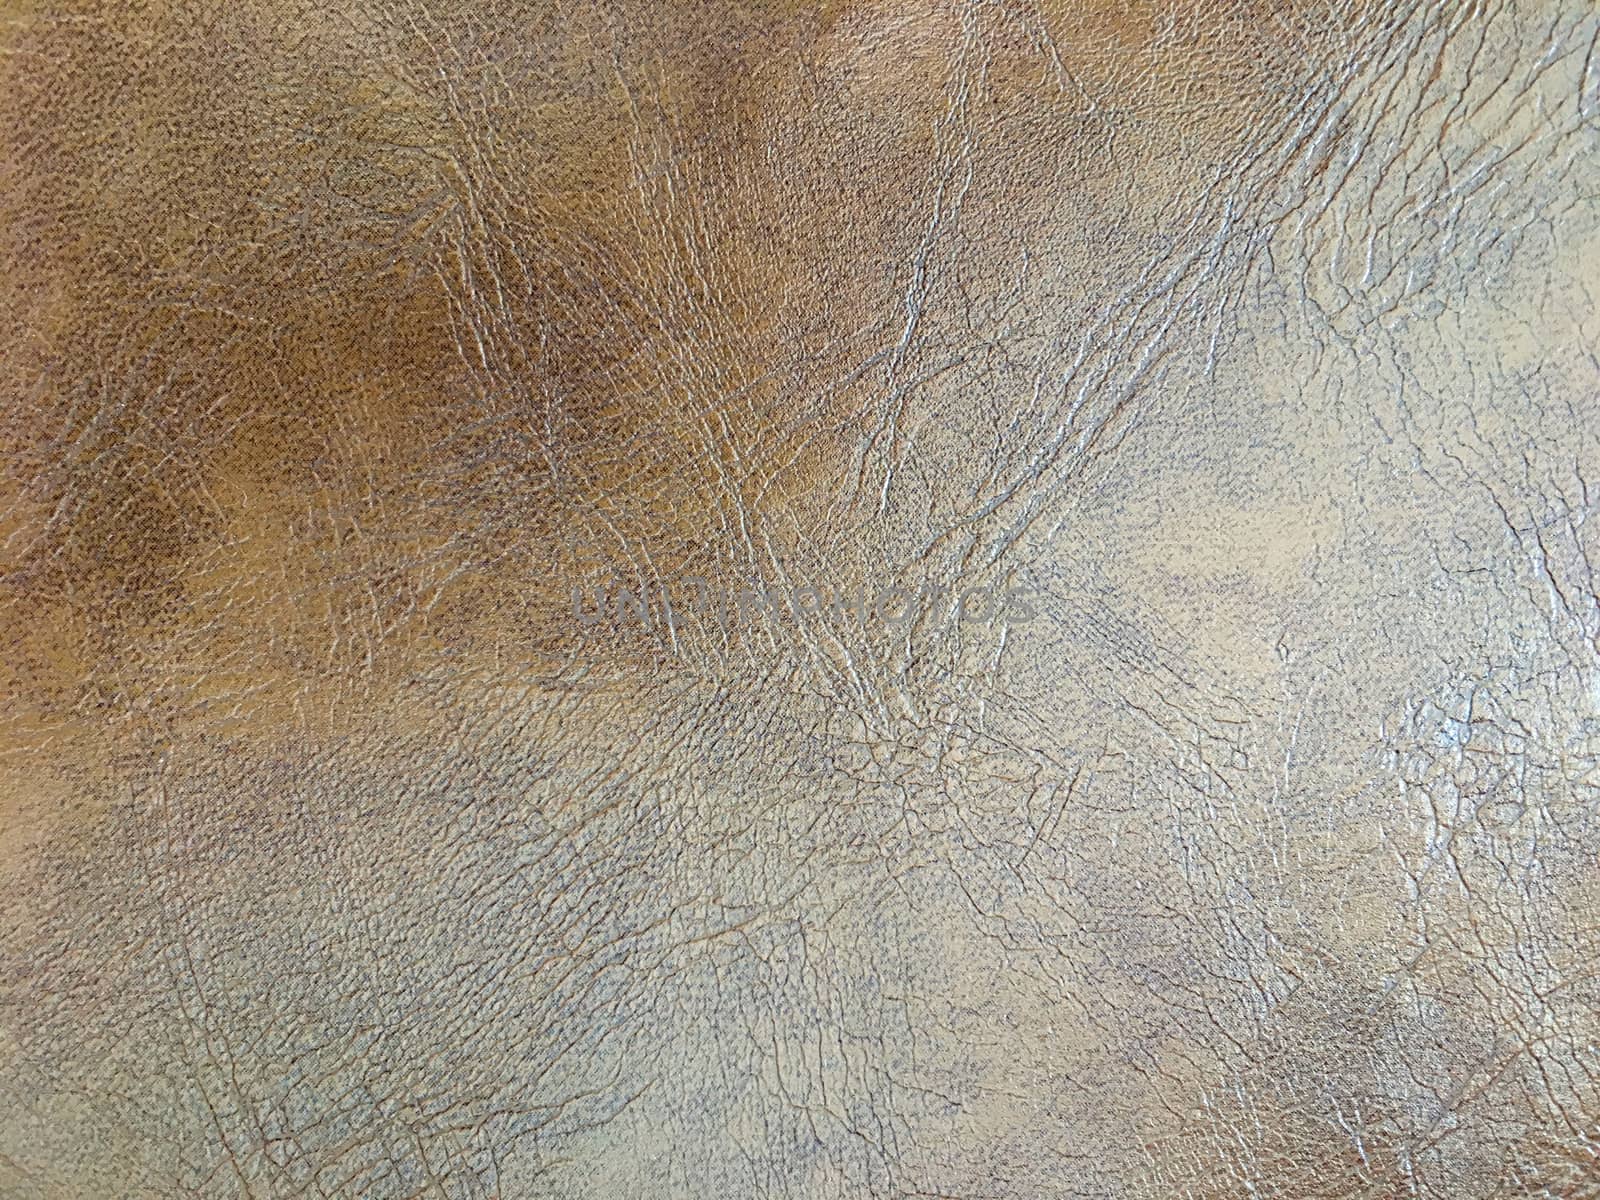 Light on brown imitation leather background
